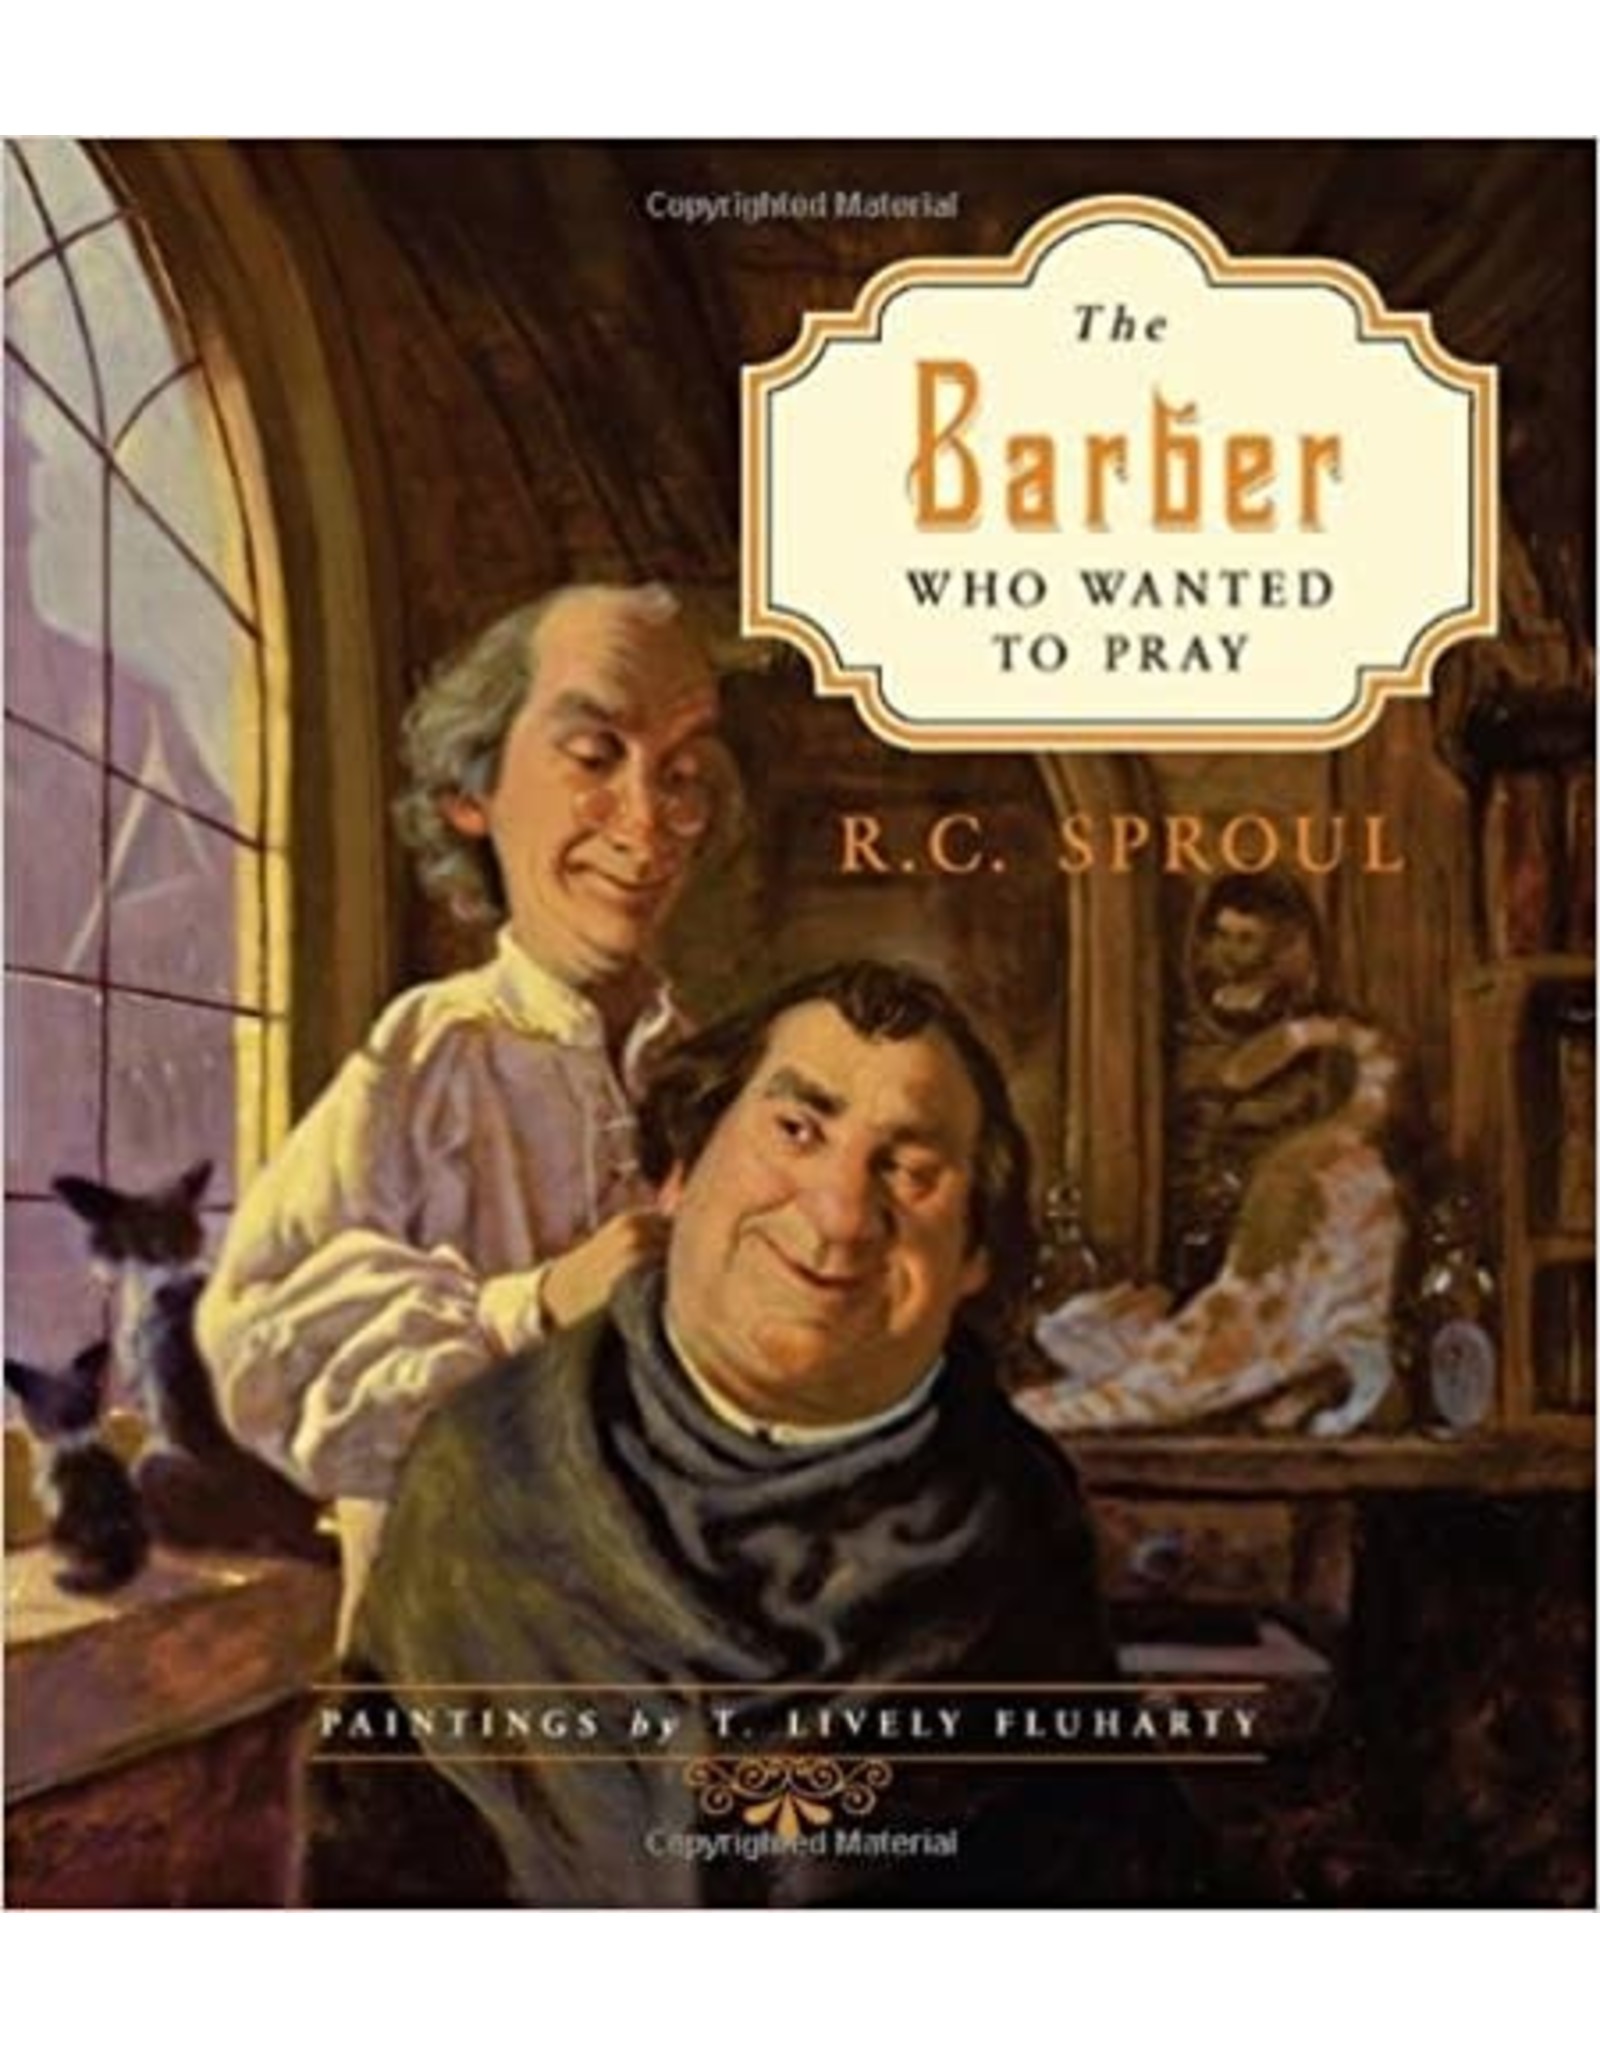 R C Sproul The Barber who Wanted to Pray